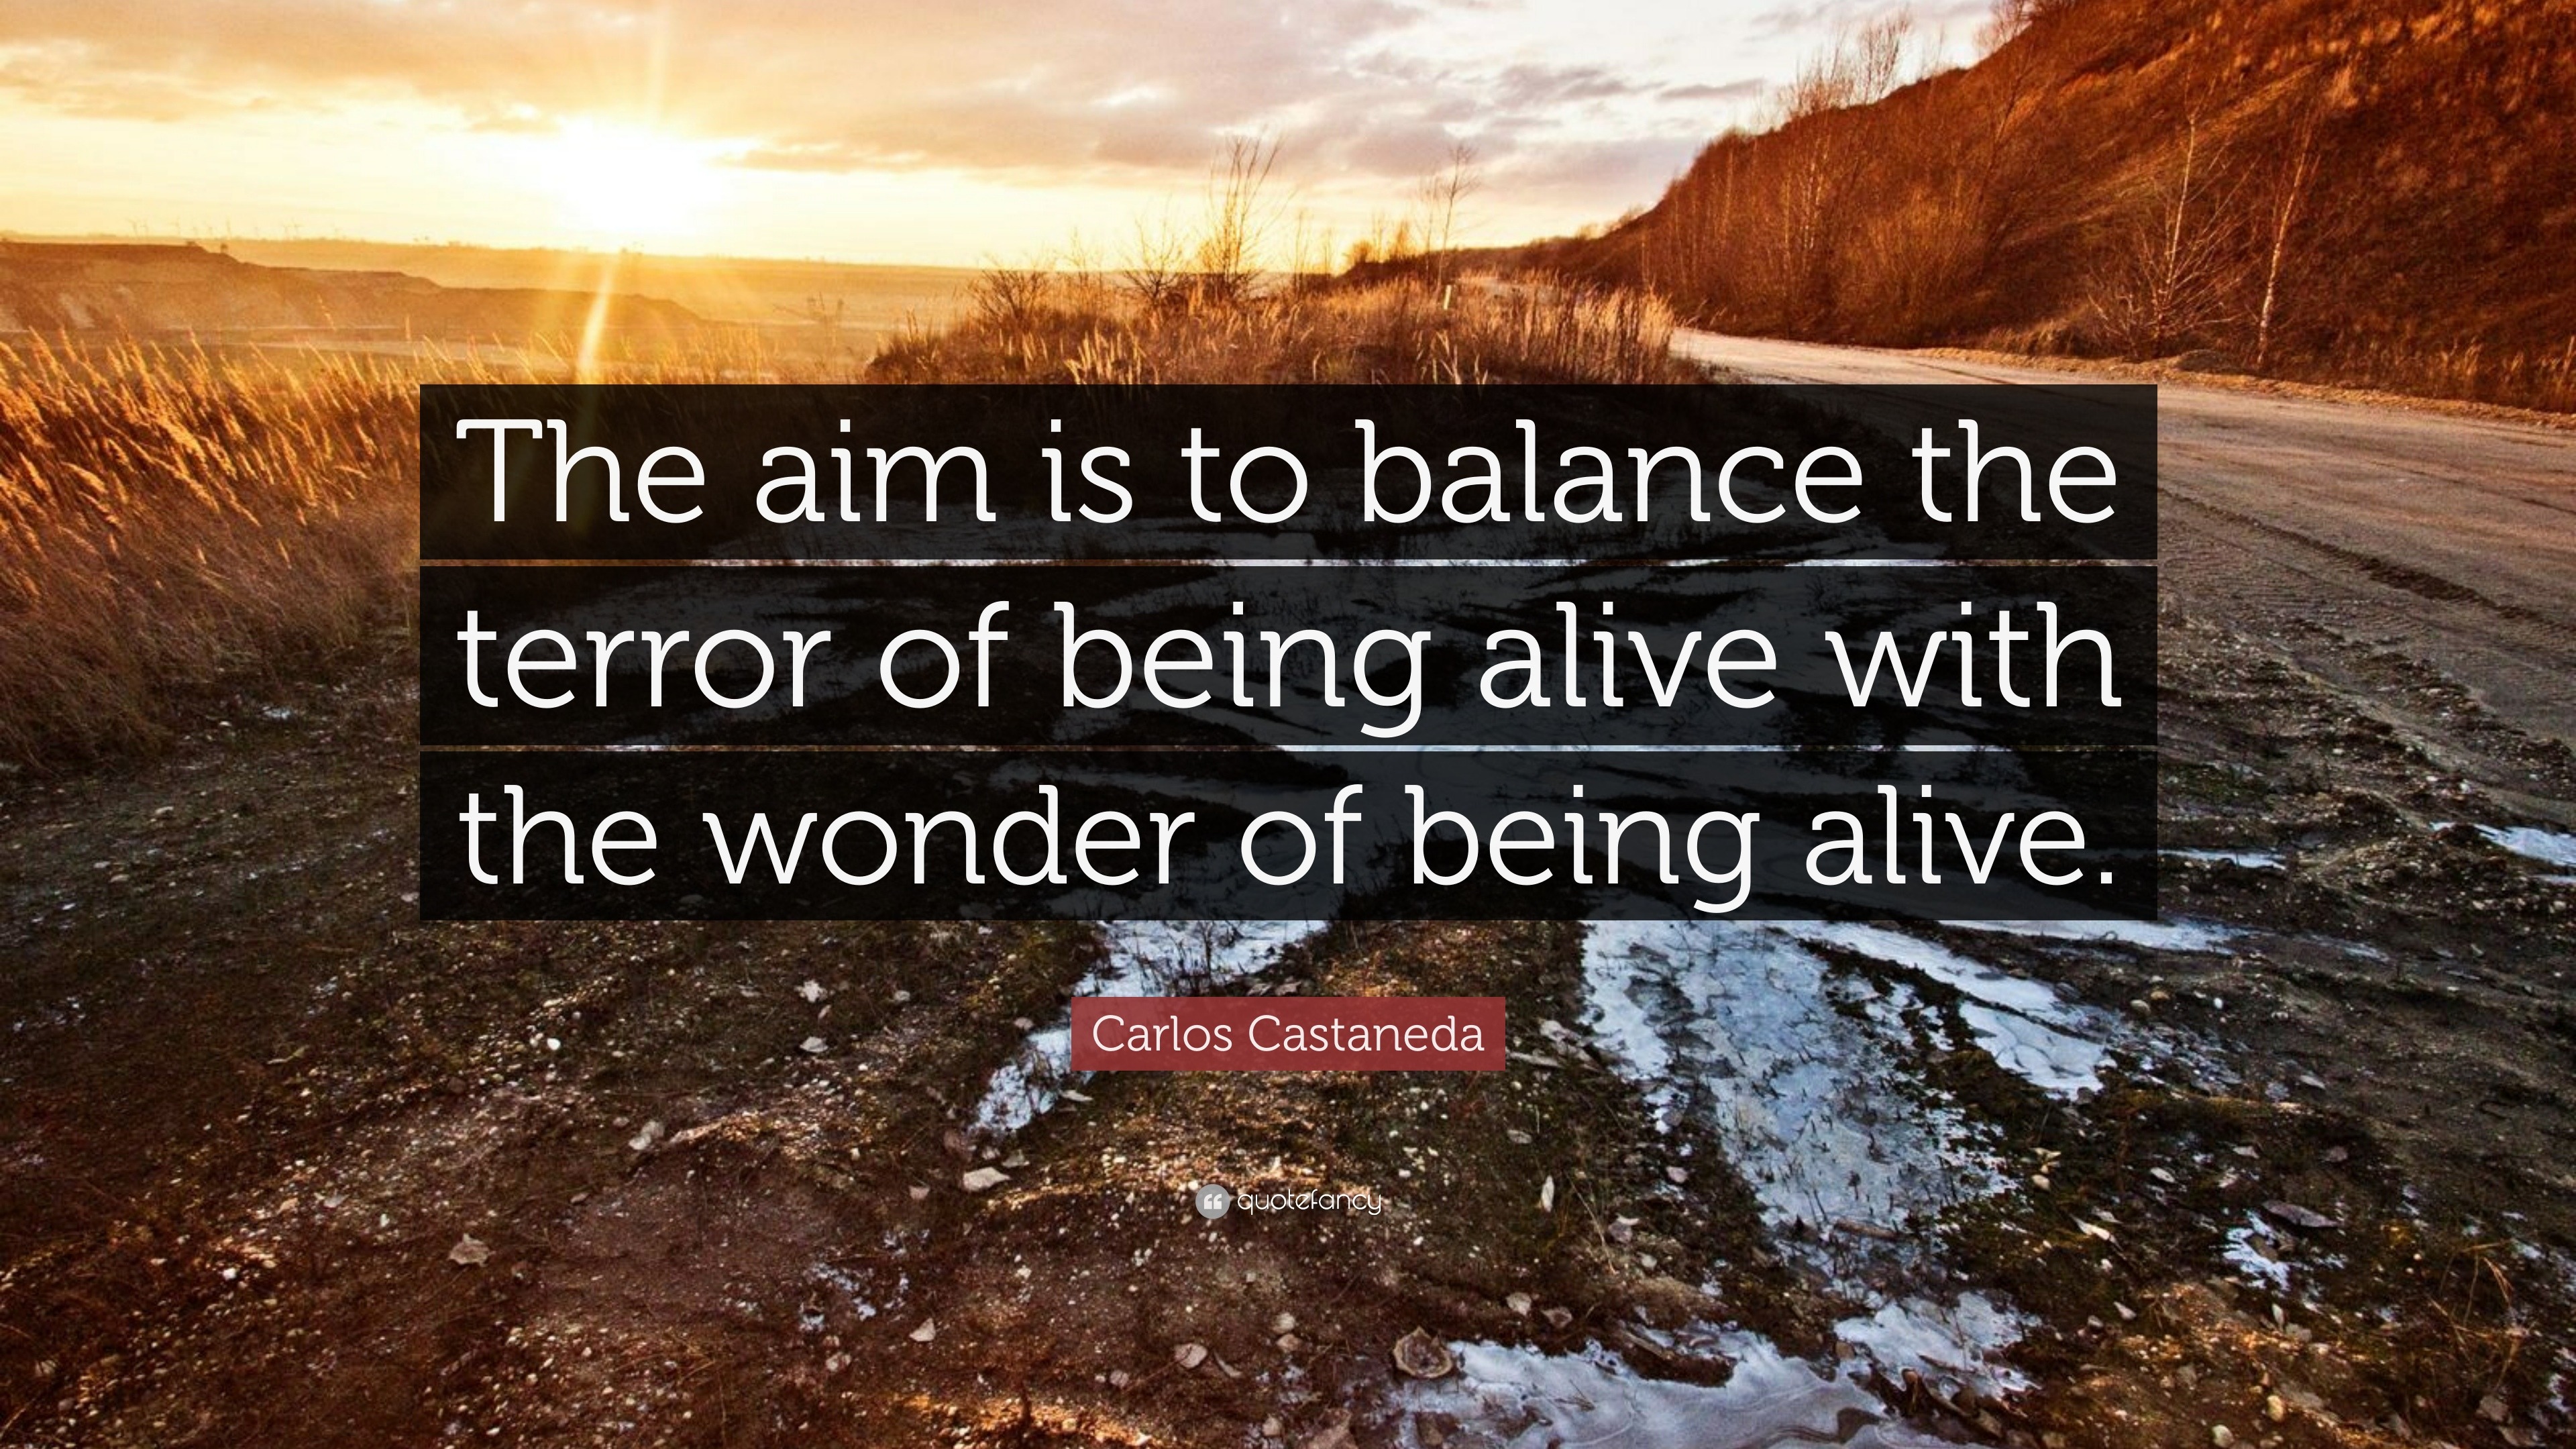 Carlos Castaneda Quote “The aim is to balance the terror of being